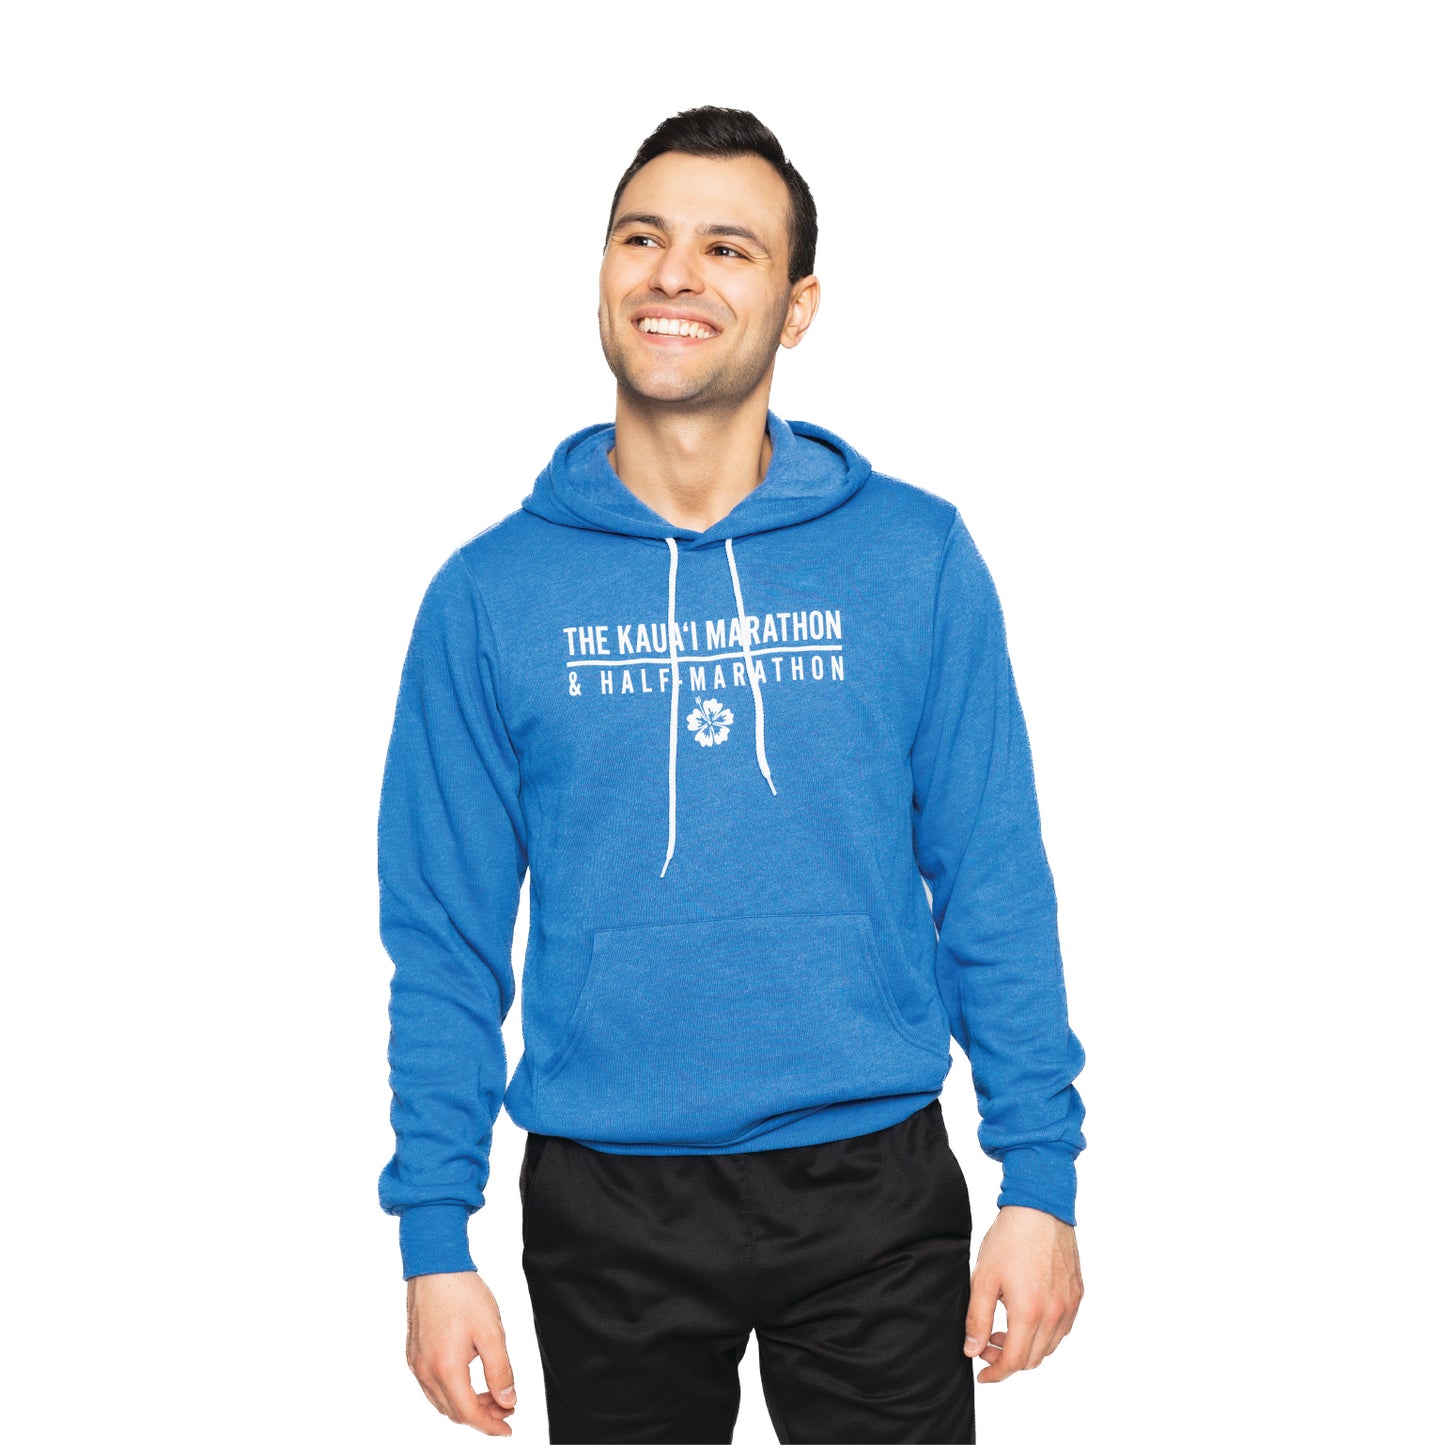 Pullover Hoody - Royal Blue w/Hibiscus Design